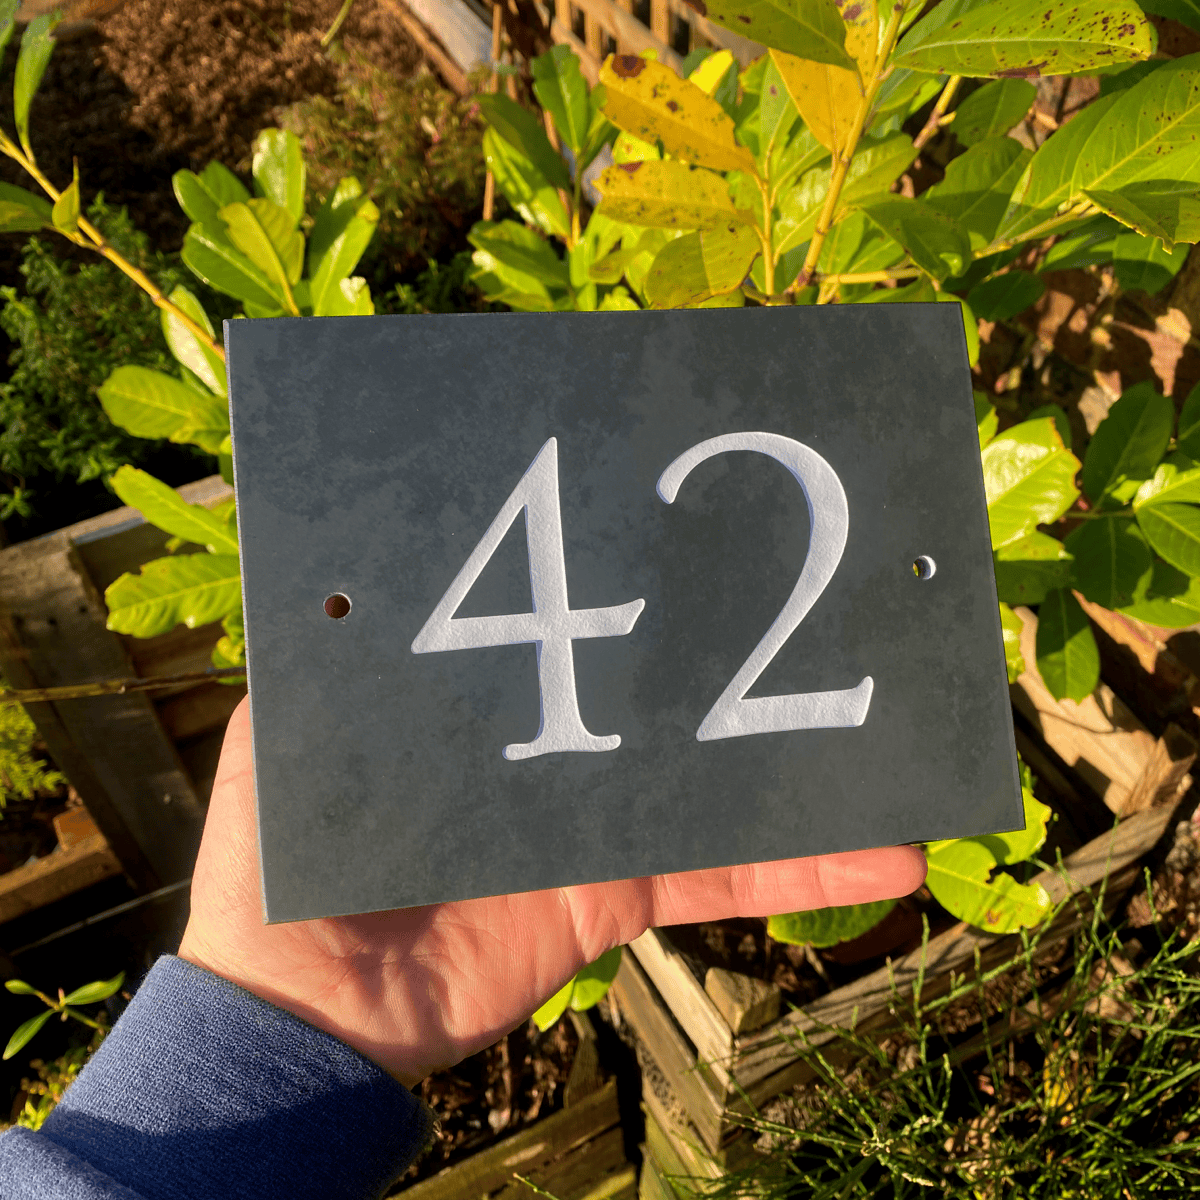 big and bold number 42 door number sign against green foliage